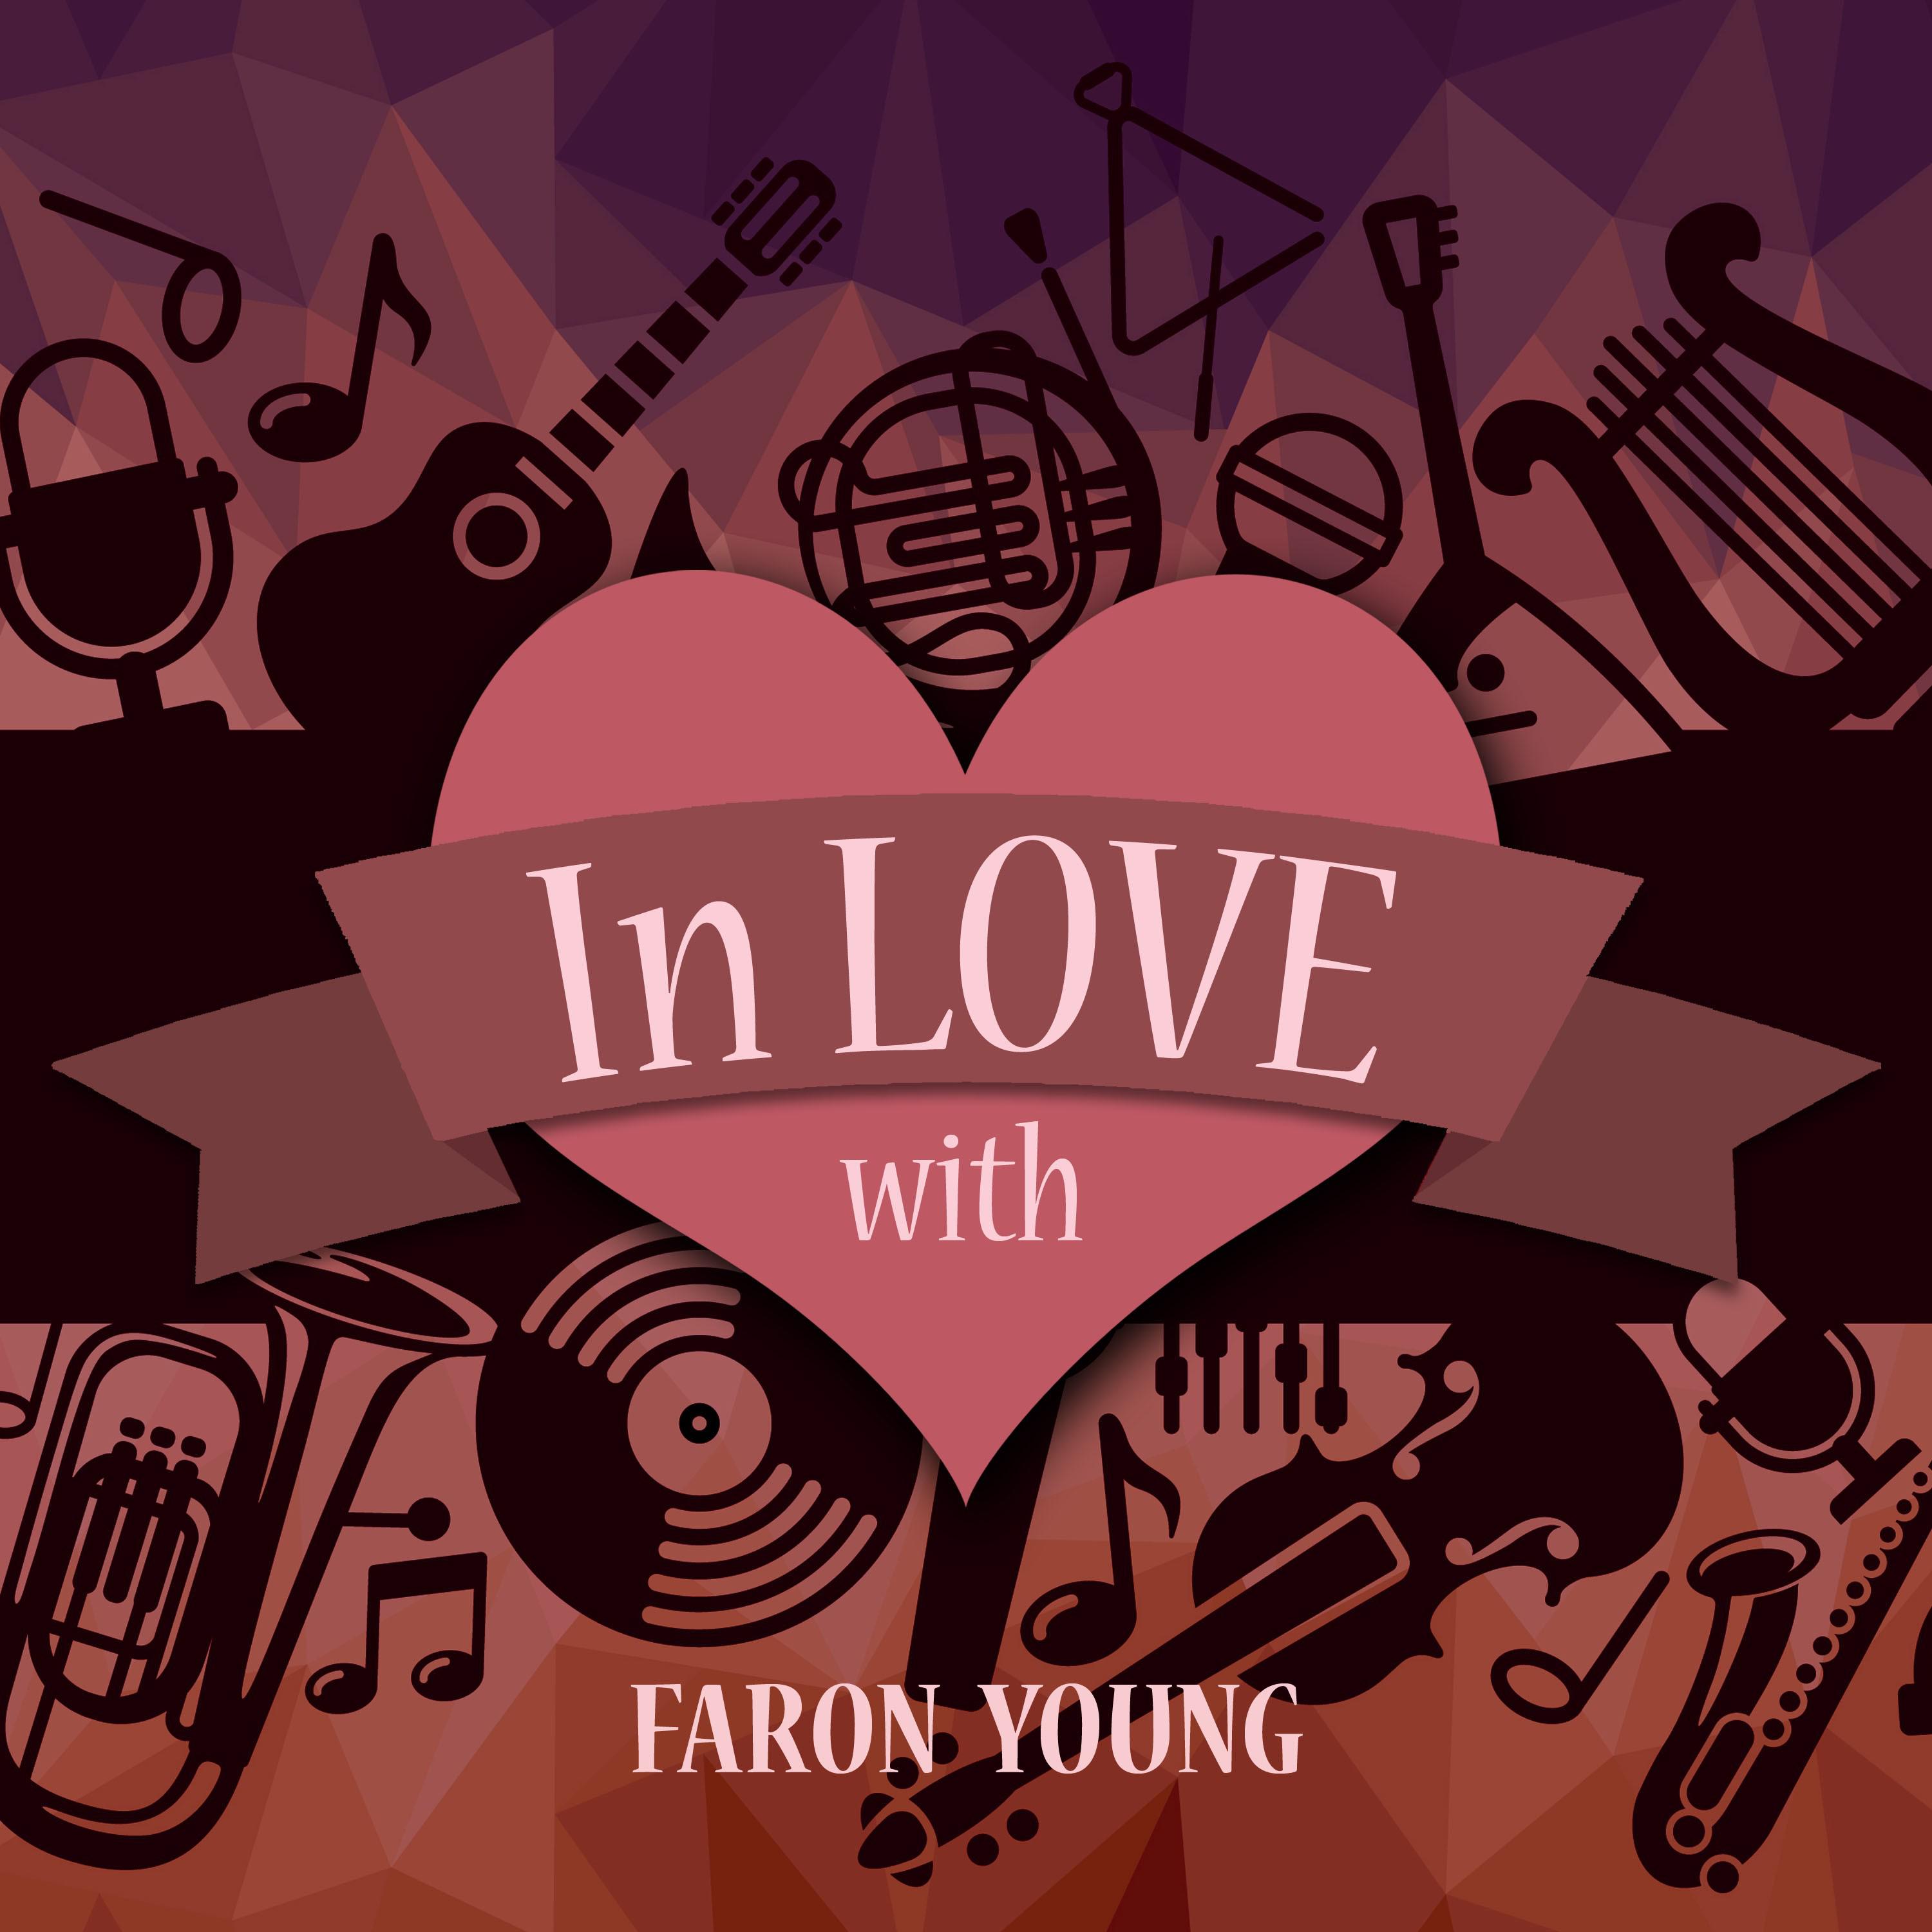 In Love with Faron Young